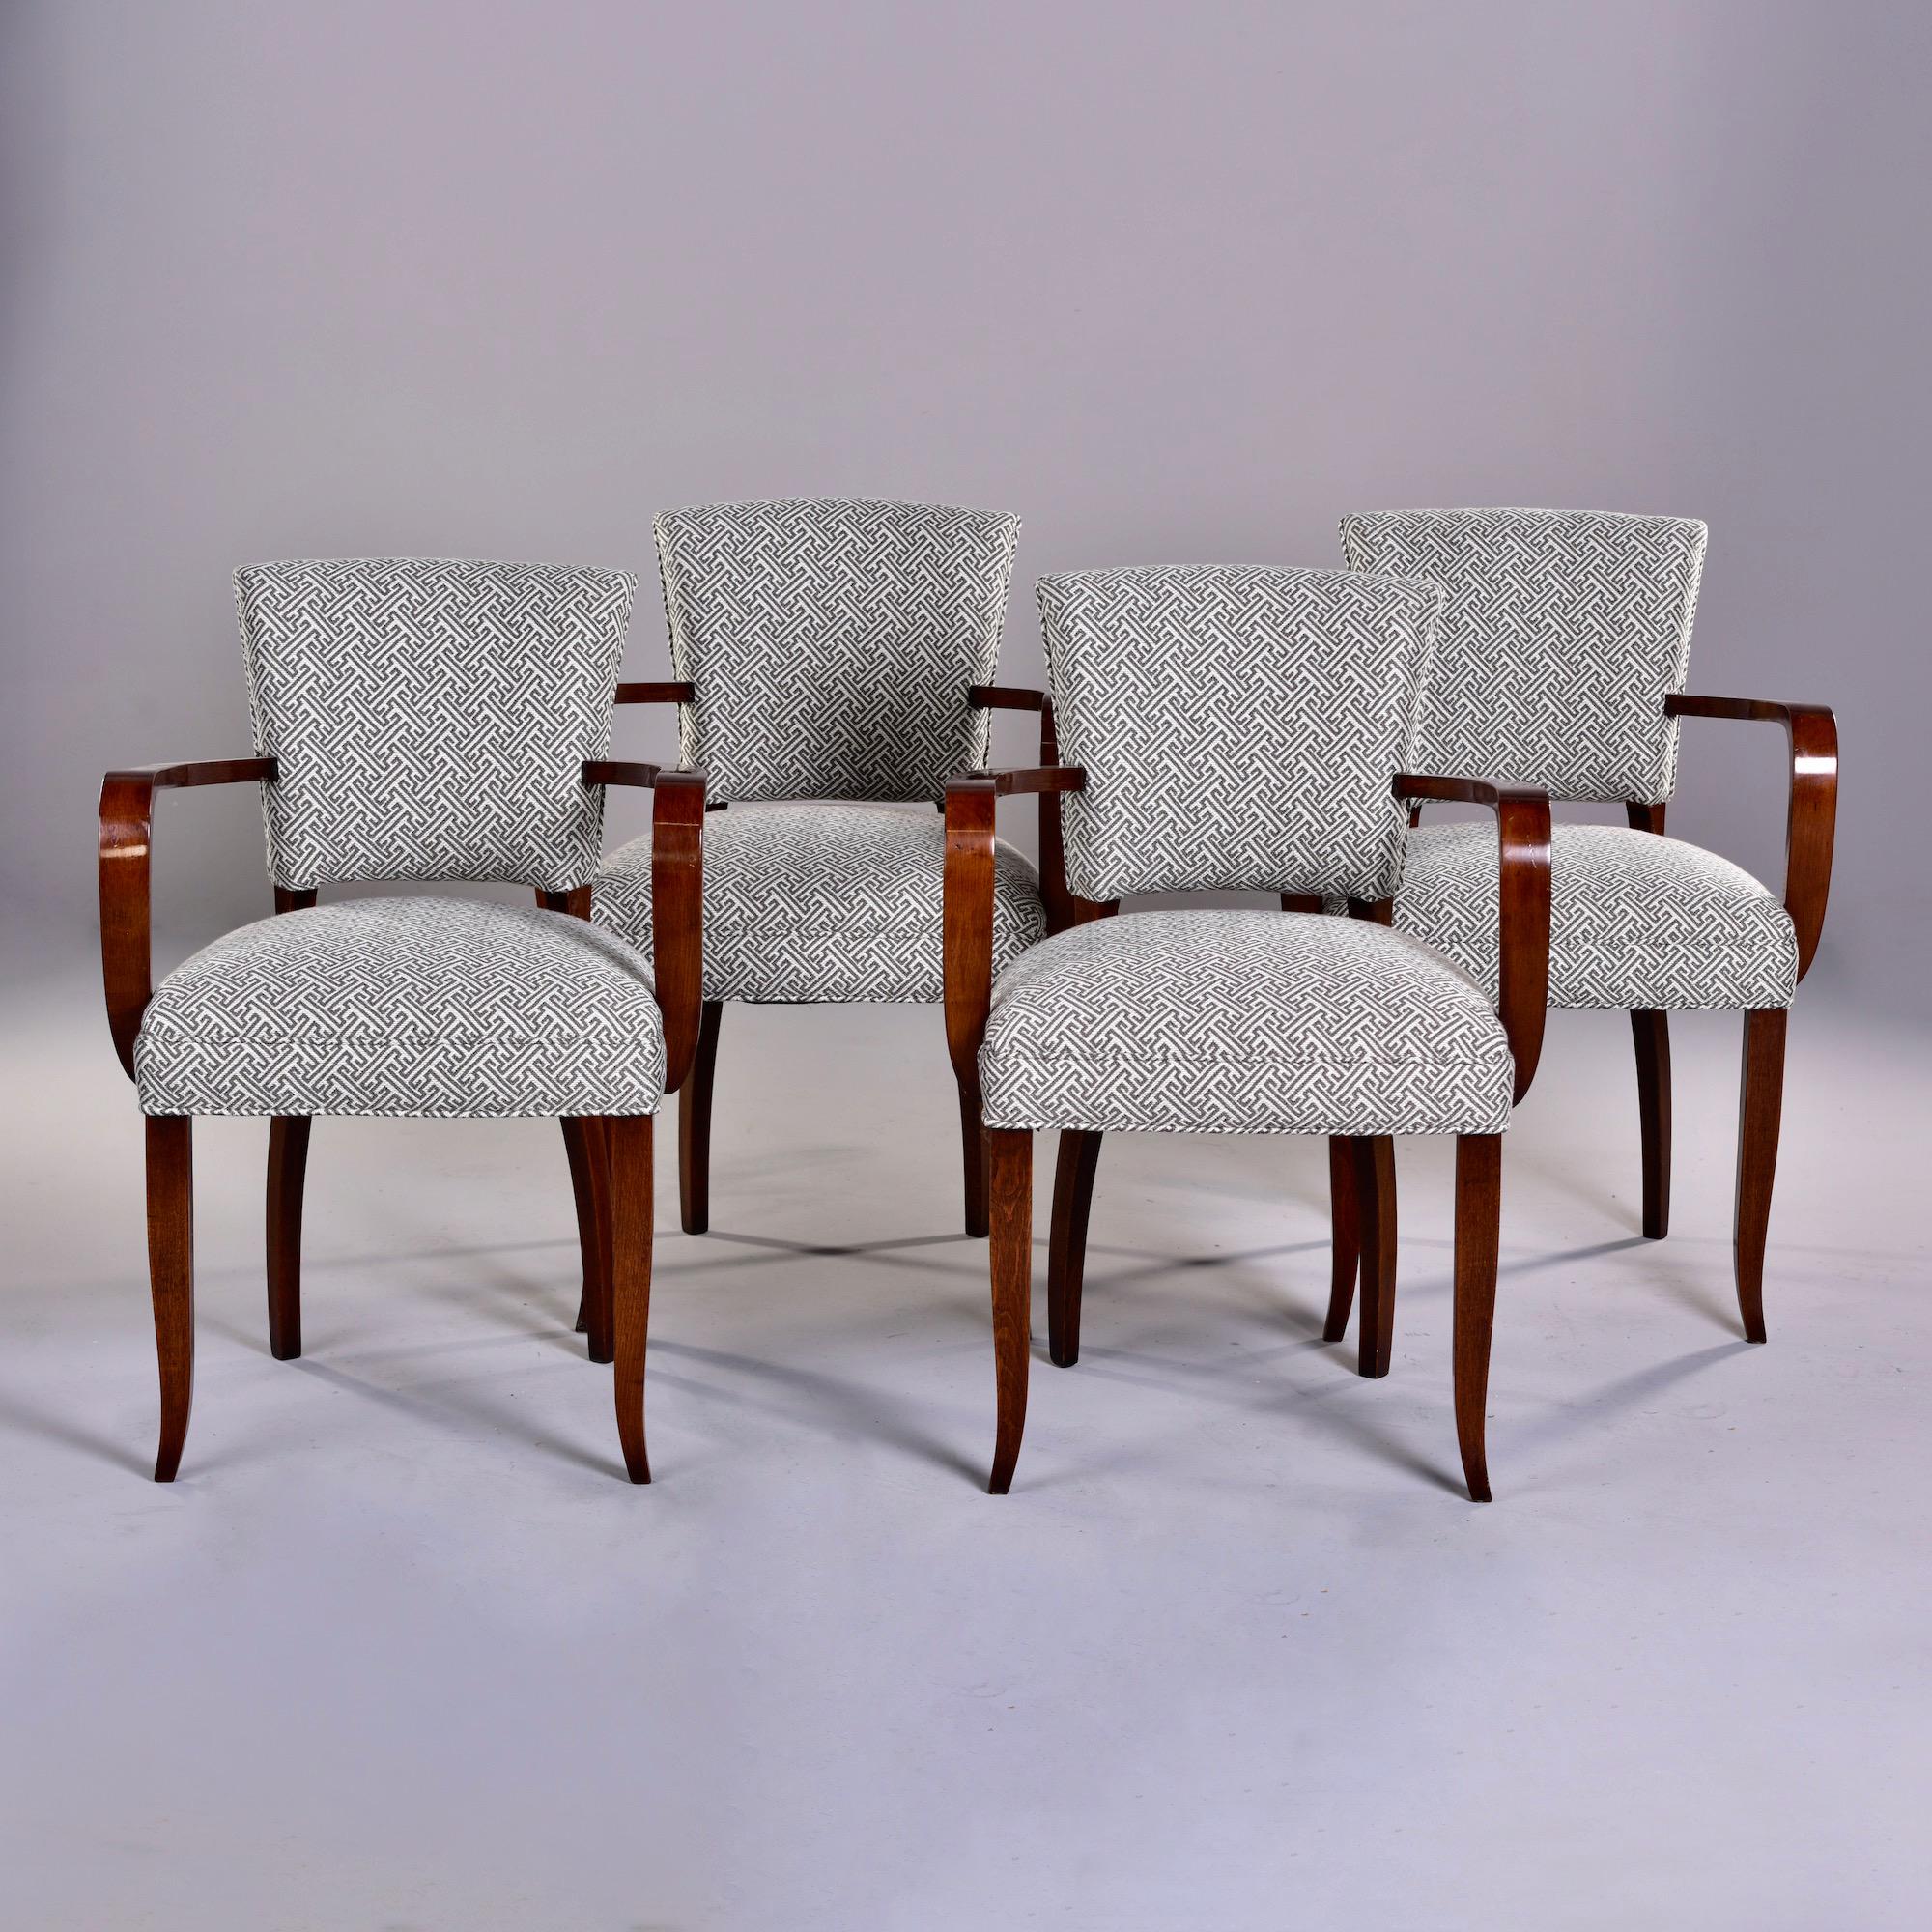 Found in England, this set of circa 1940s bridge chairs have mahogany frames with dramatic curved arms and subtly tapered saber legs. Newly upholstered in a woven gray and cream geometric lattice like pattern. Frames were professionally darkened and